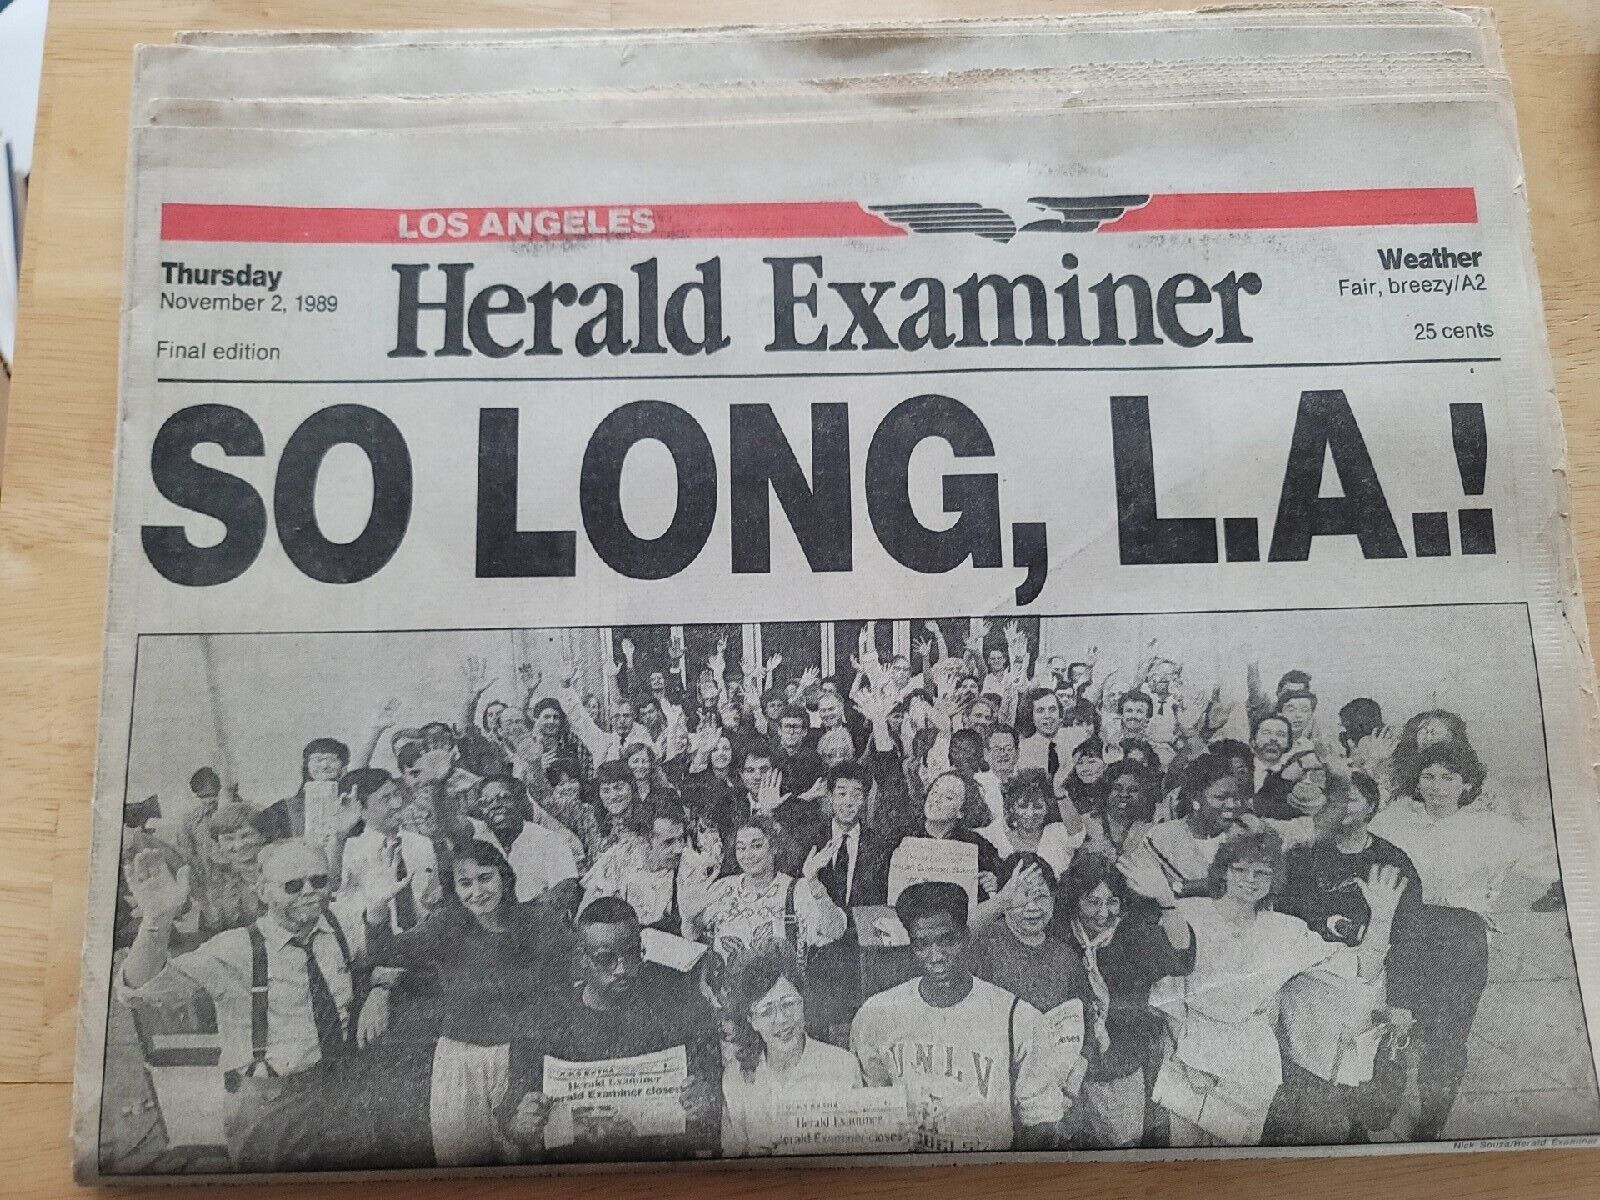 LOS ANGELES HERALD-EXAMINER - FINAL ISSUE - 11/2/89 - THE ENTIRE NEWSPAPER